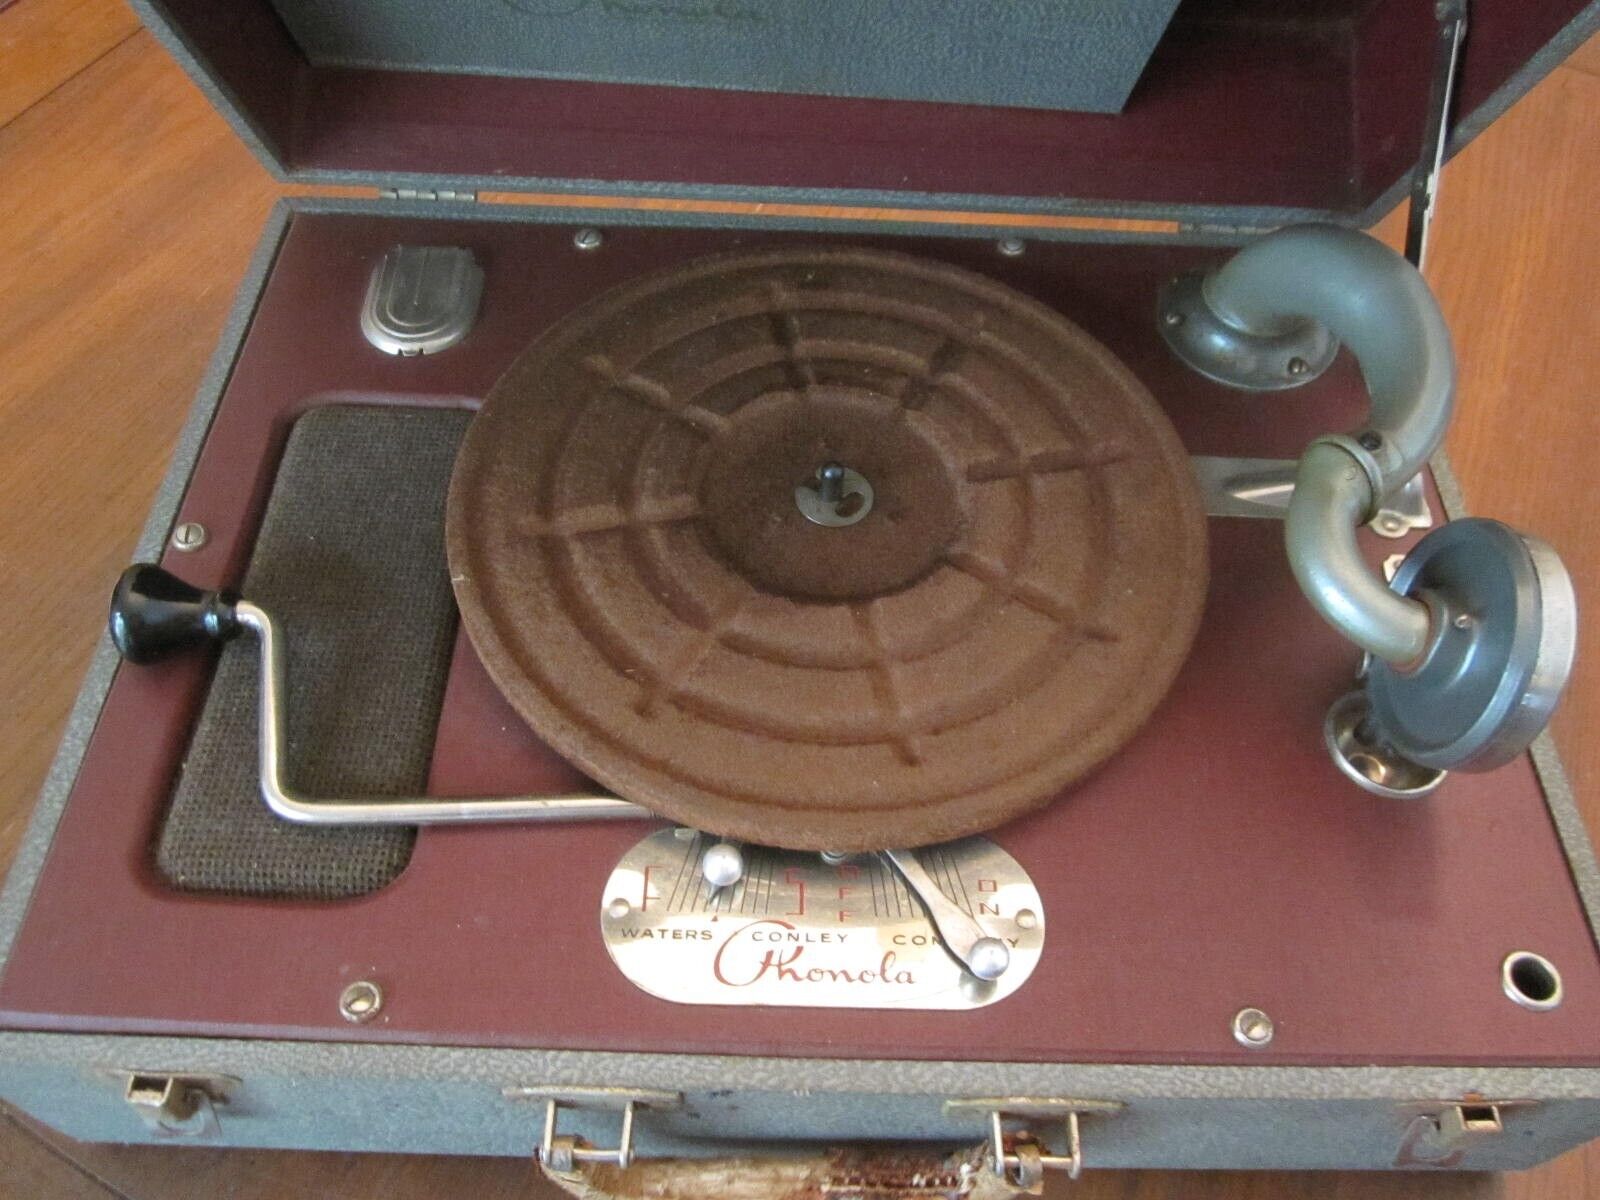 Antique Crank 78 RPM Portable Record Player by Phonla Waters Conley Co.